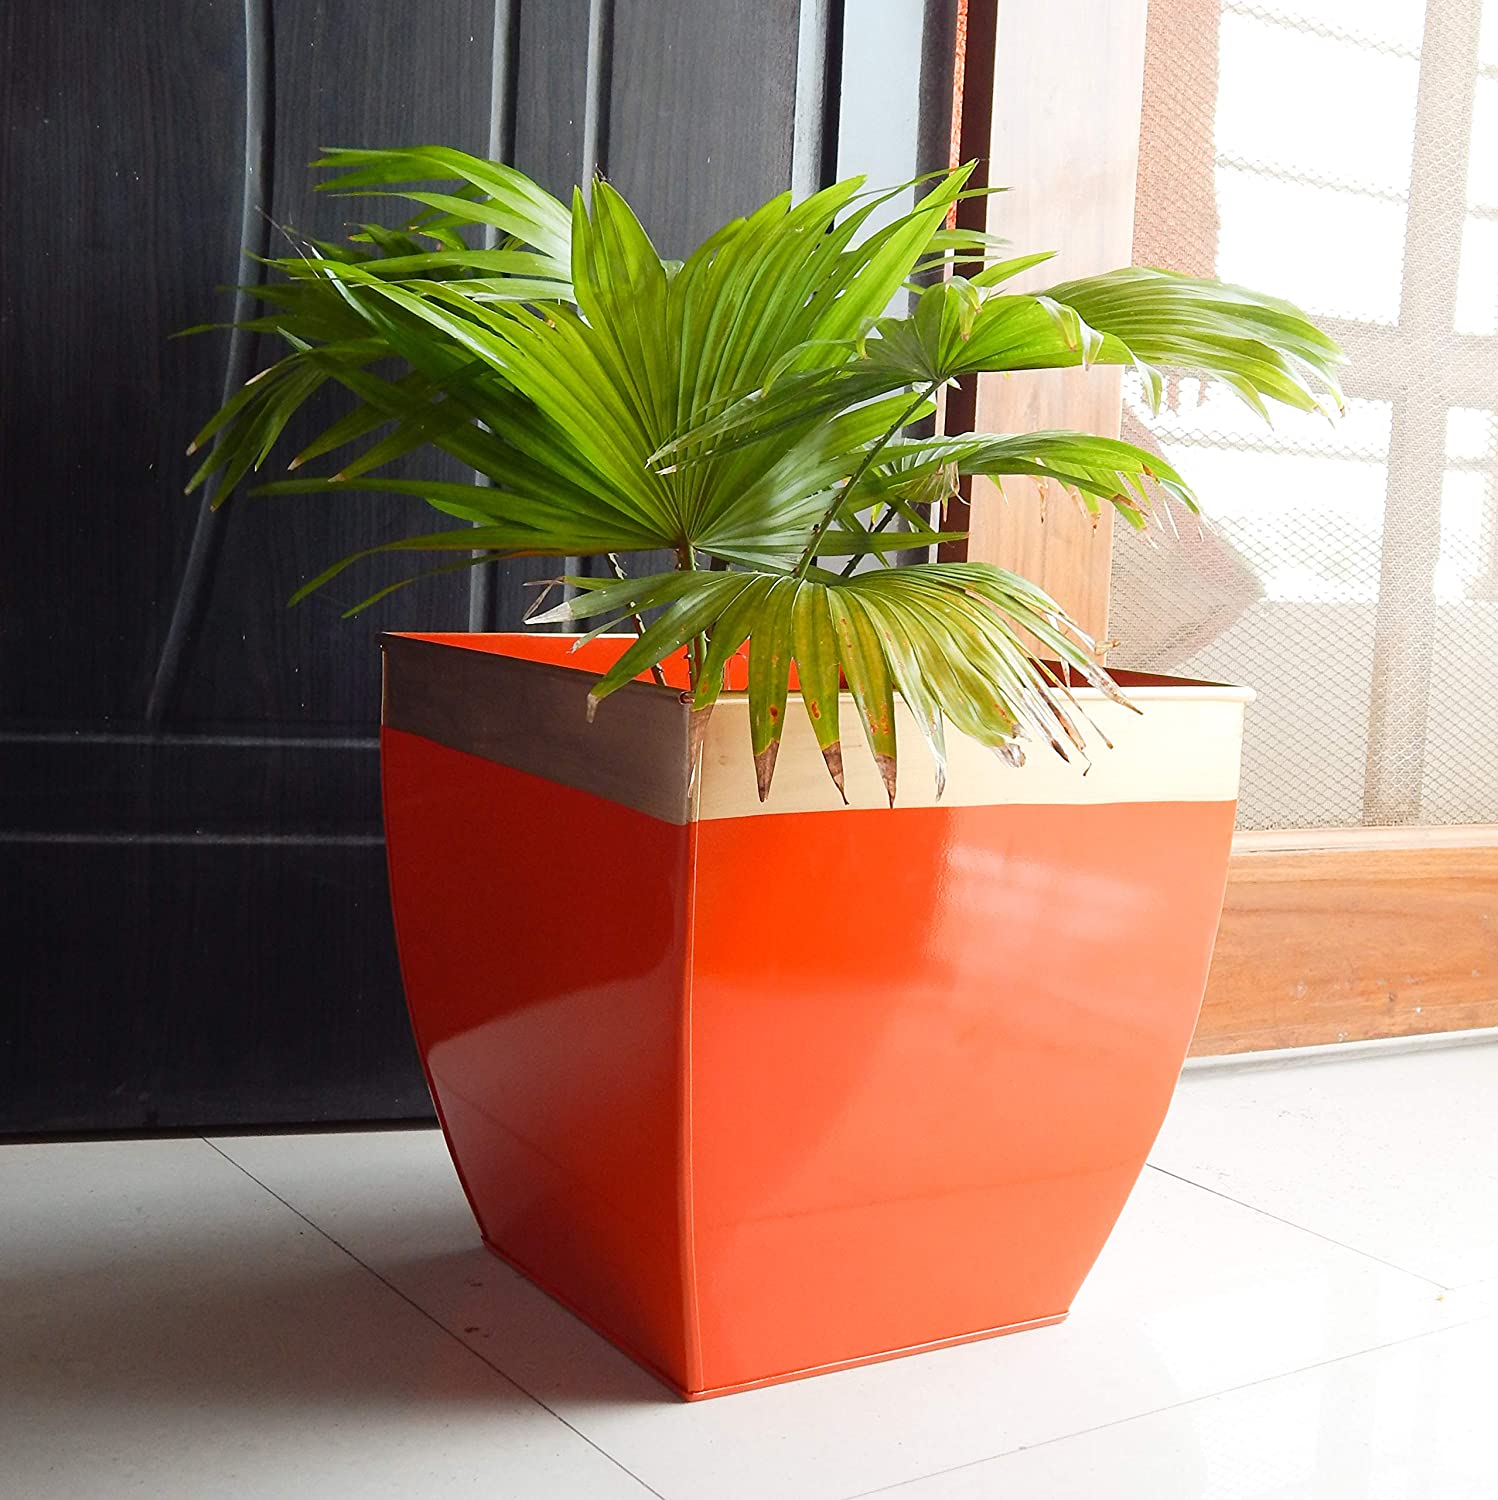 ecofynd 12 inches midland metal planter | indoor outdoor balcony tapered plant pot | home garden office flowering container cover, orange, pack of 2